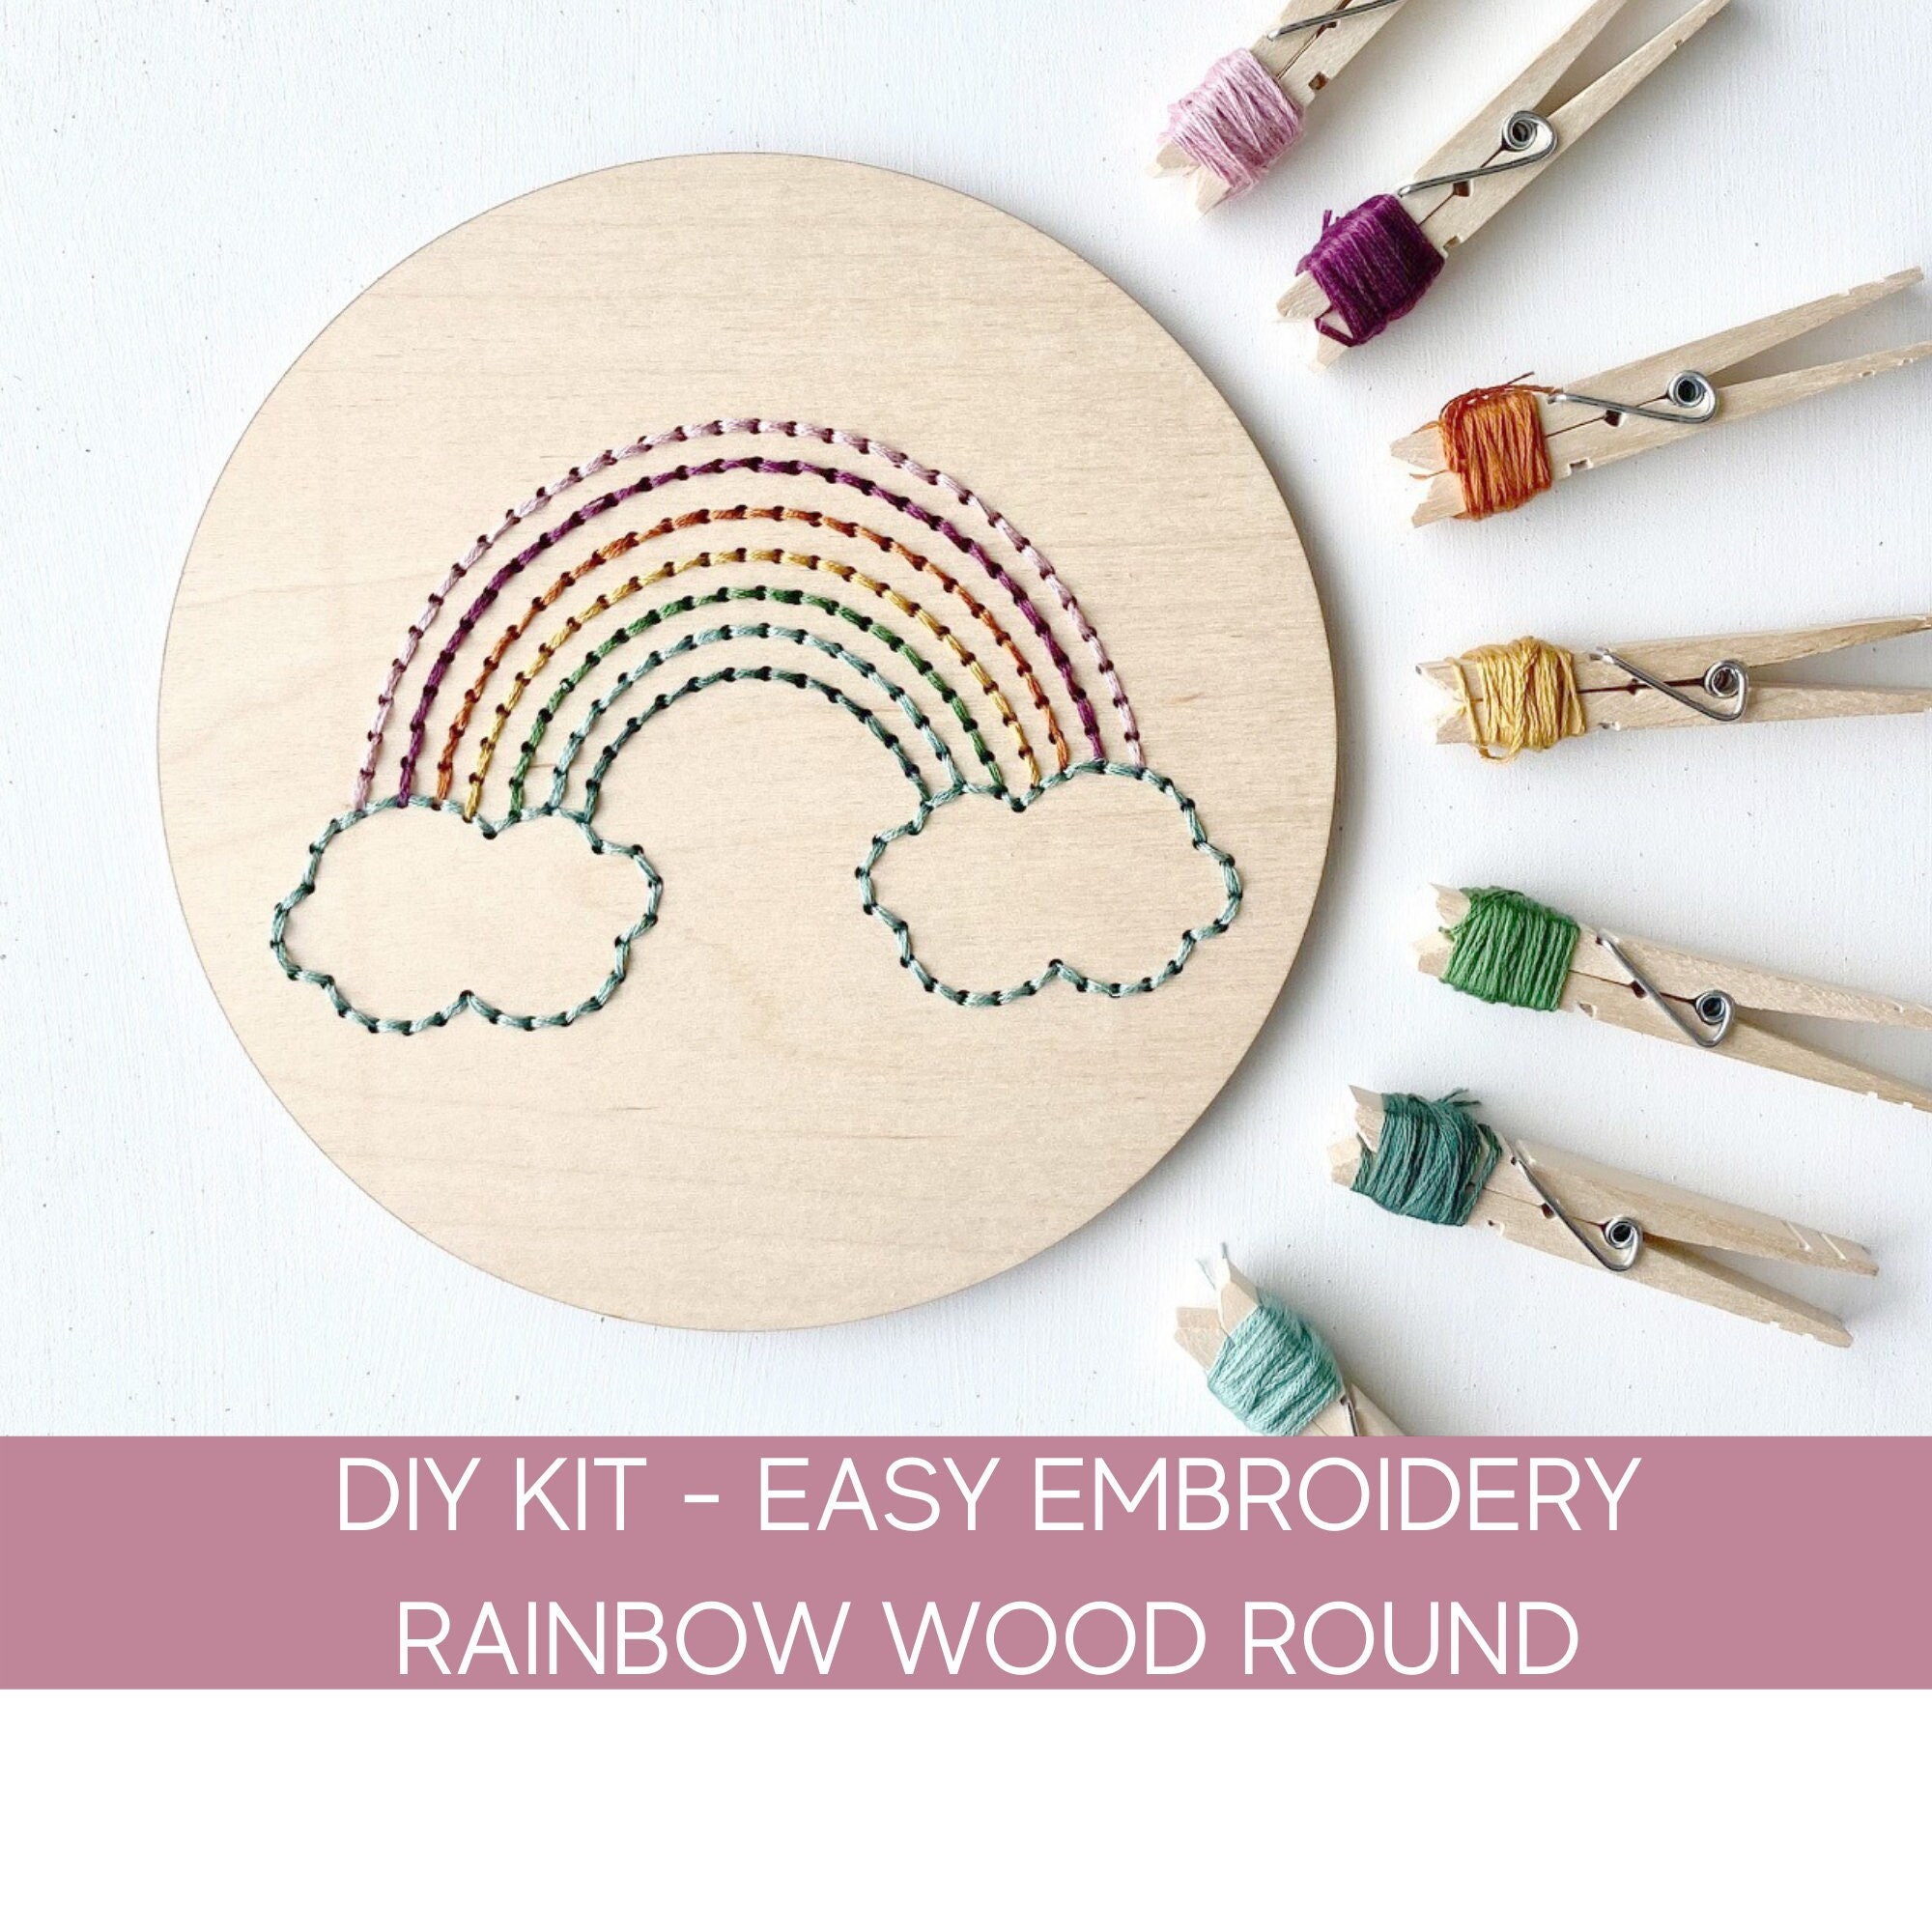 Learn to Embroider Rainbow Sampler, Full Embroidery Kit for Beginners,  Modern Hand Embroidery, Easy Embroidery Kit, Kids Craft Kit, DIY Kit 